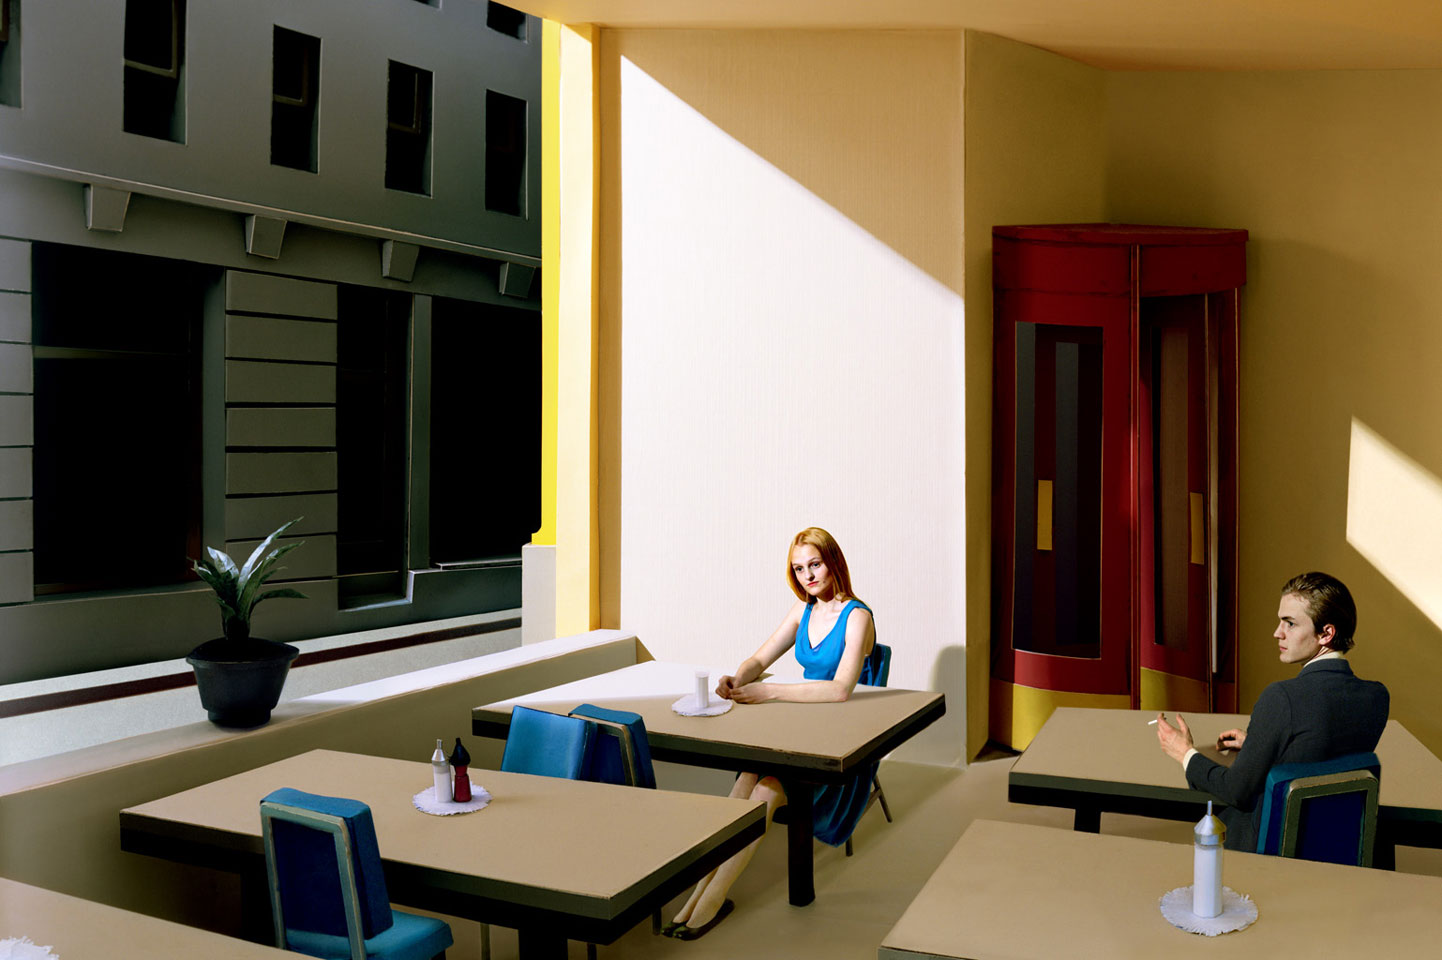 Sunlight in the Cafeteria, by Laetitia Molenaar (The Netherlands)

2nd place in the Experimental category